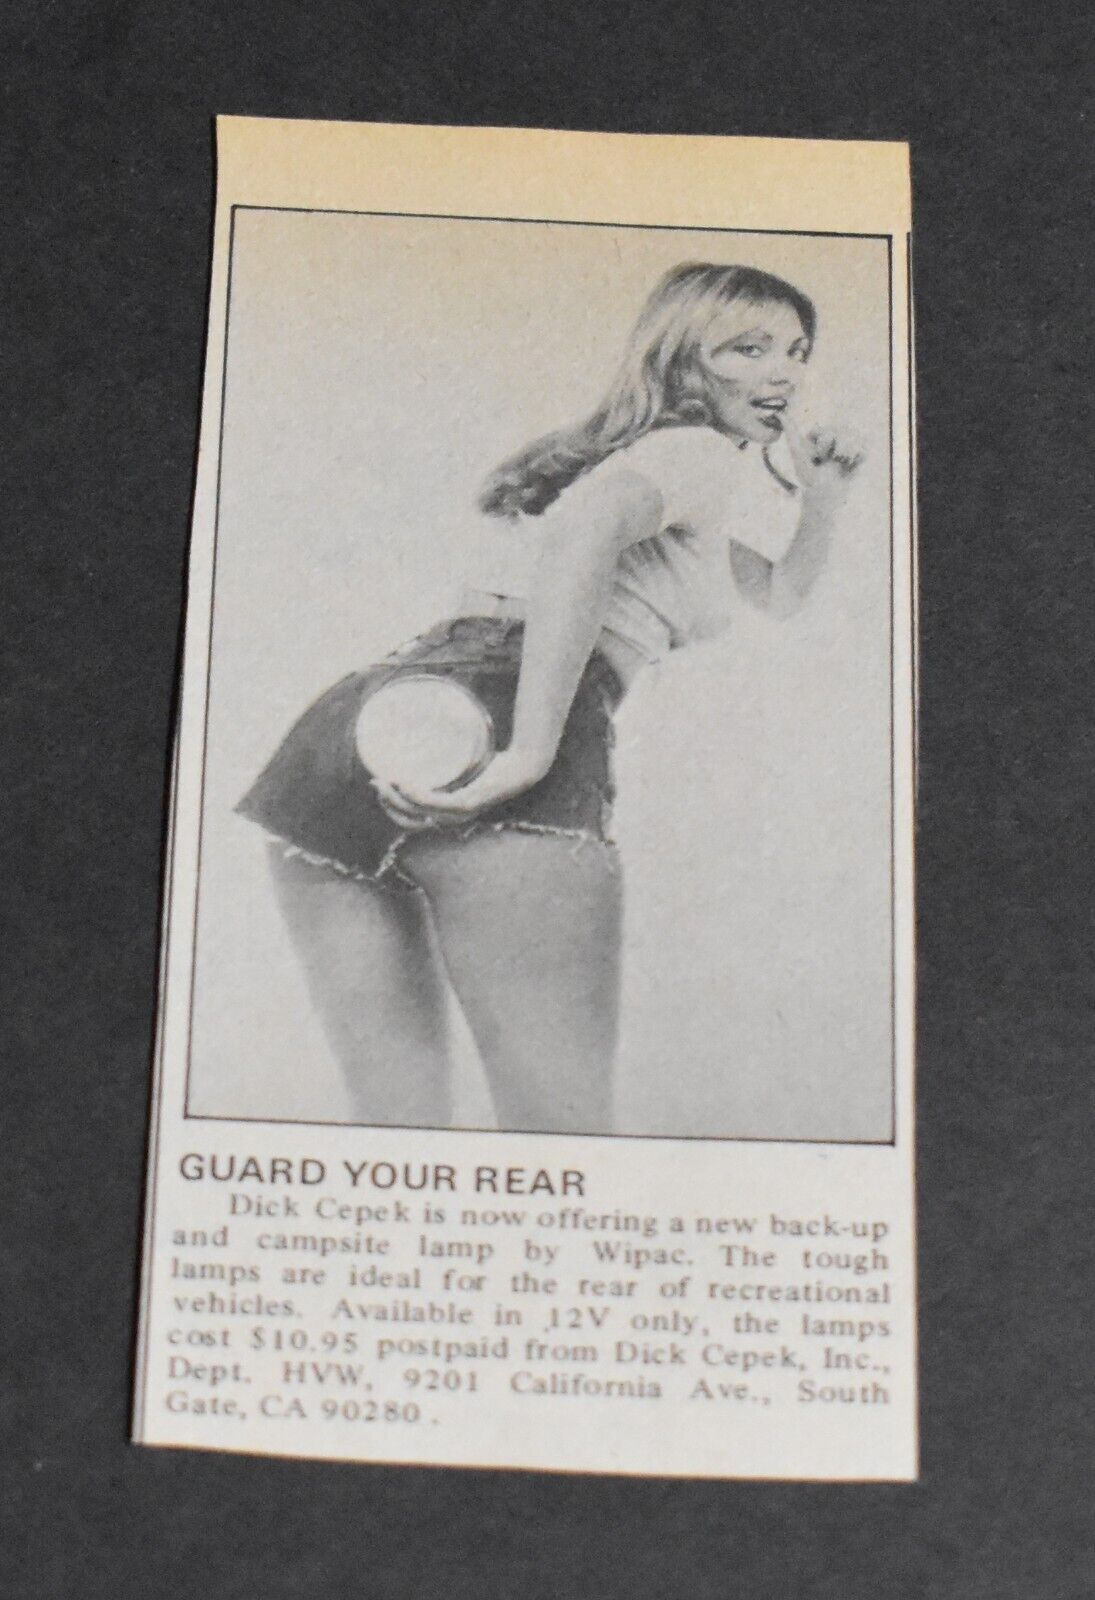 1975 Print Ad Guard your Rear Dick Cepek 12v Lamps South Gate CA art pinup girl